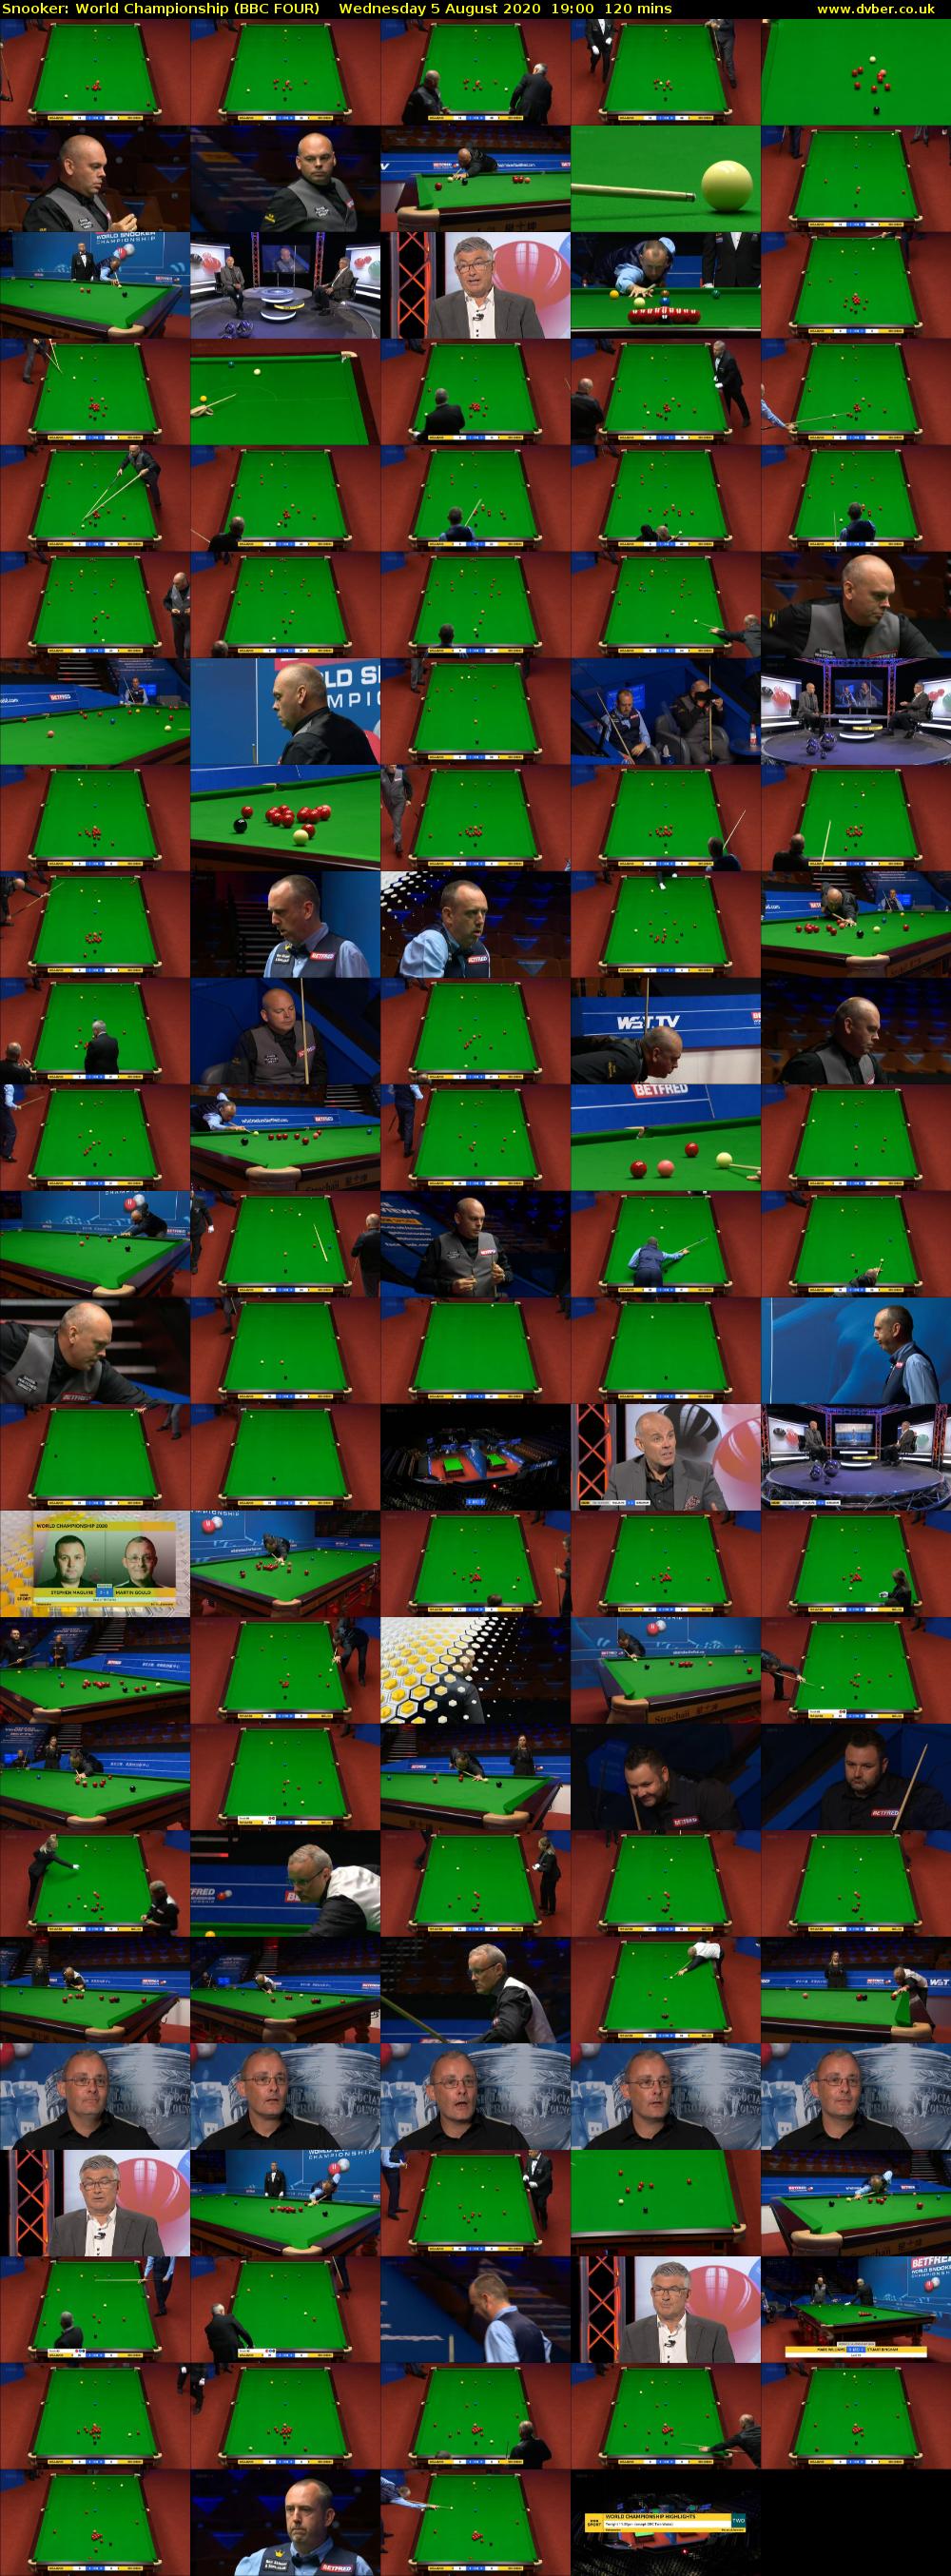 Snooker: World Championship (BBC FOUR) Wednesday 5 August 2020 19:00 - 21:00